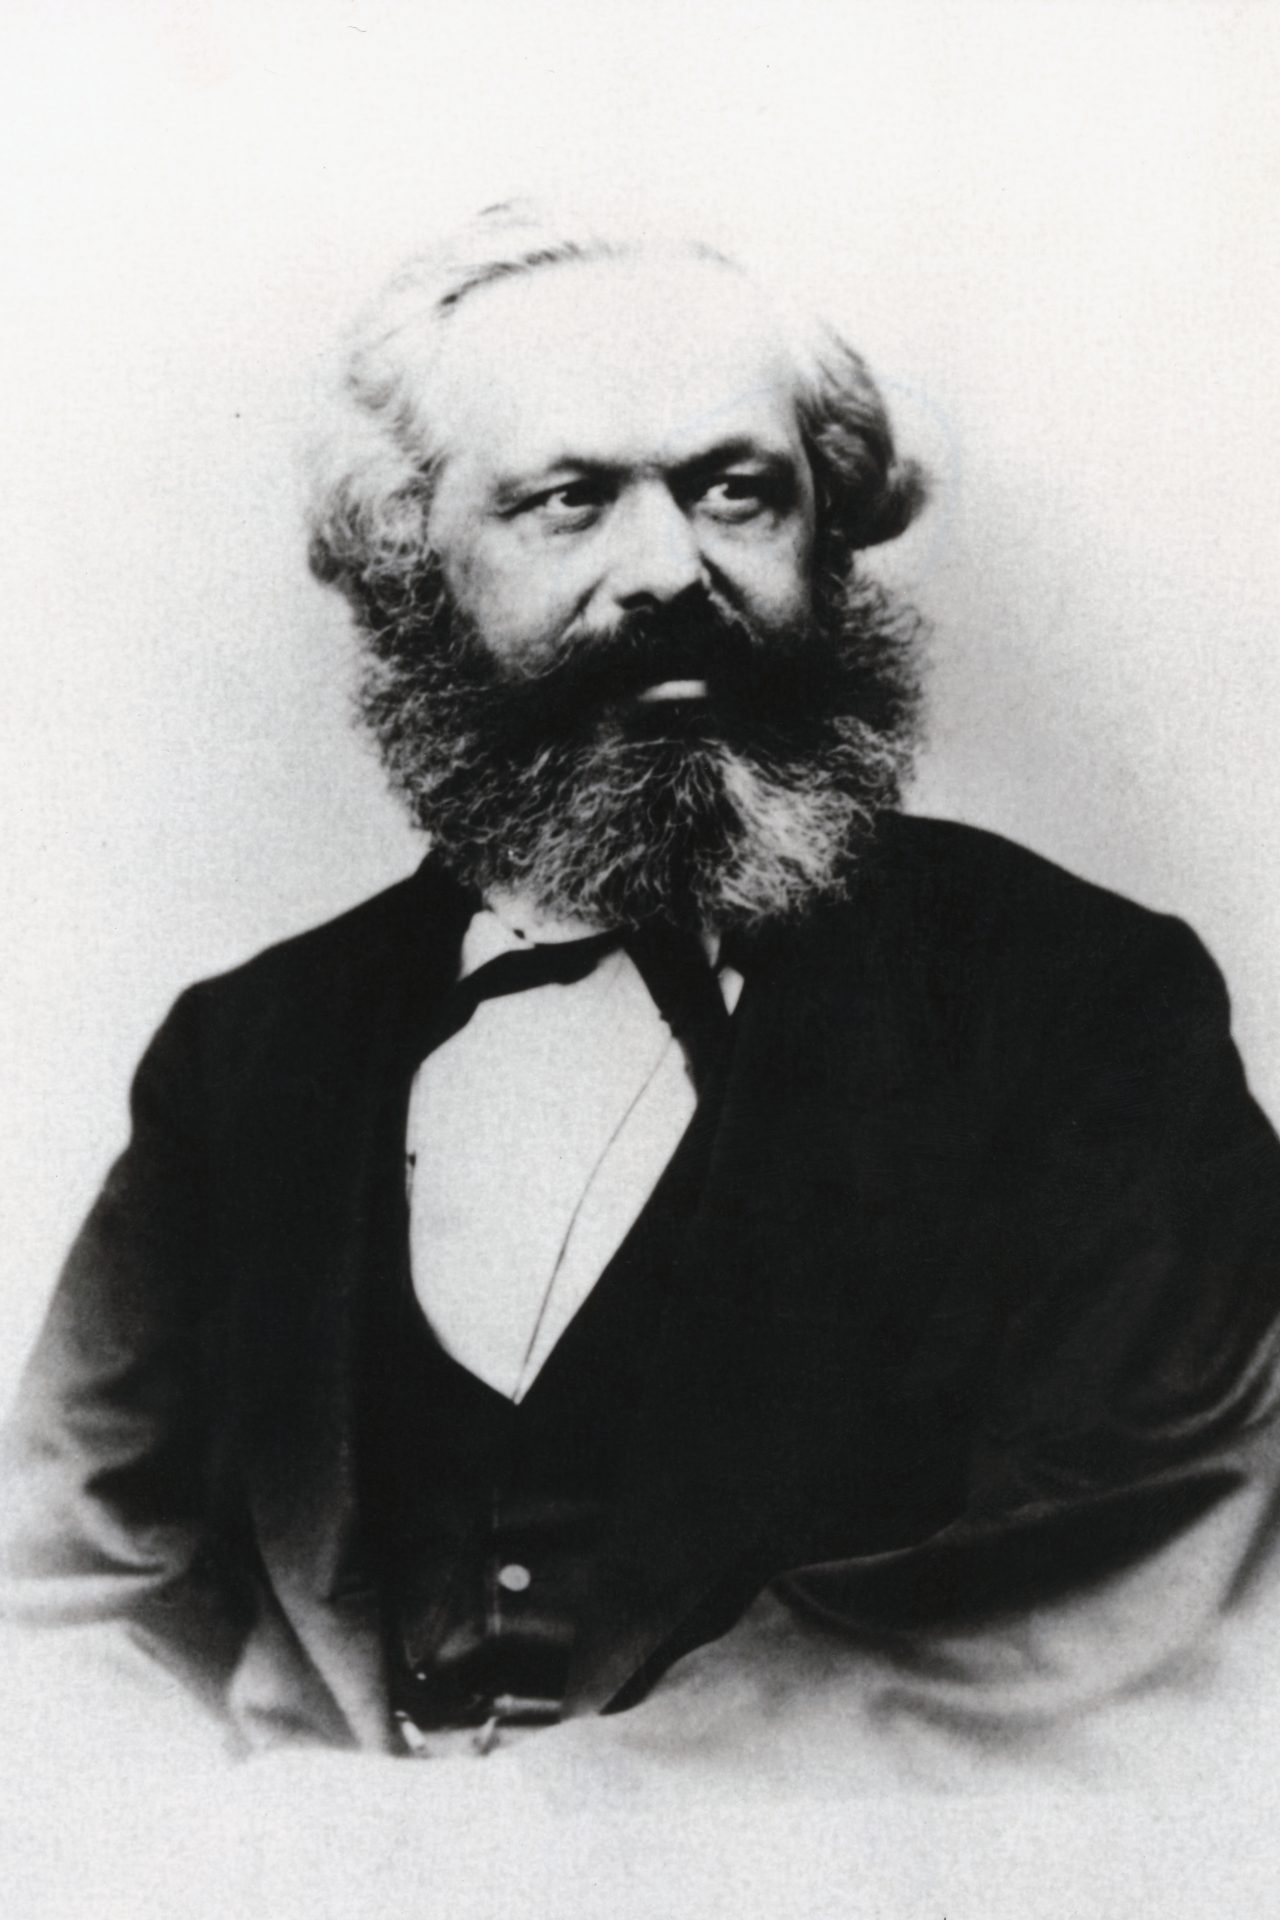 <p>Karl Marx died peacefully in his armchair on March 14, 1883, from tuberculosis. A few hours before his death, when his maid asked him to write down his last words, the German philosopher replied: "Last words are for fools who haven’t said enough!"</p> <p><a href="https://www.msn.com/en-us/channel/source/Showbizz%20Daily%20English/sr-vid-w8hcuhvu3f8qr5wn5rk8xhsu5x8irqrgtxcypg4uxvn7tq9vkkfa?cvid=cddbc5c4fc9748a196a59c4cb5f3d12a&ei=7" rel="noopener">Follow Showbizz Daily to see the best stories every day</a></p>